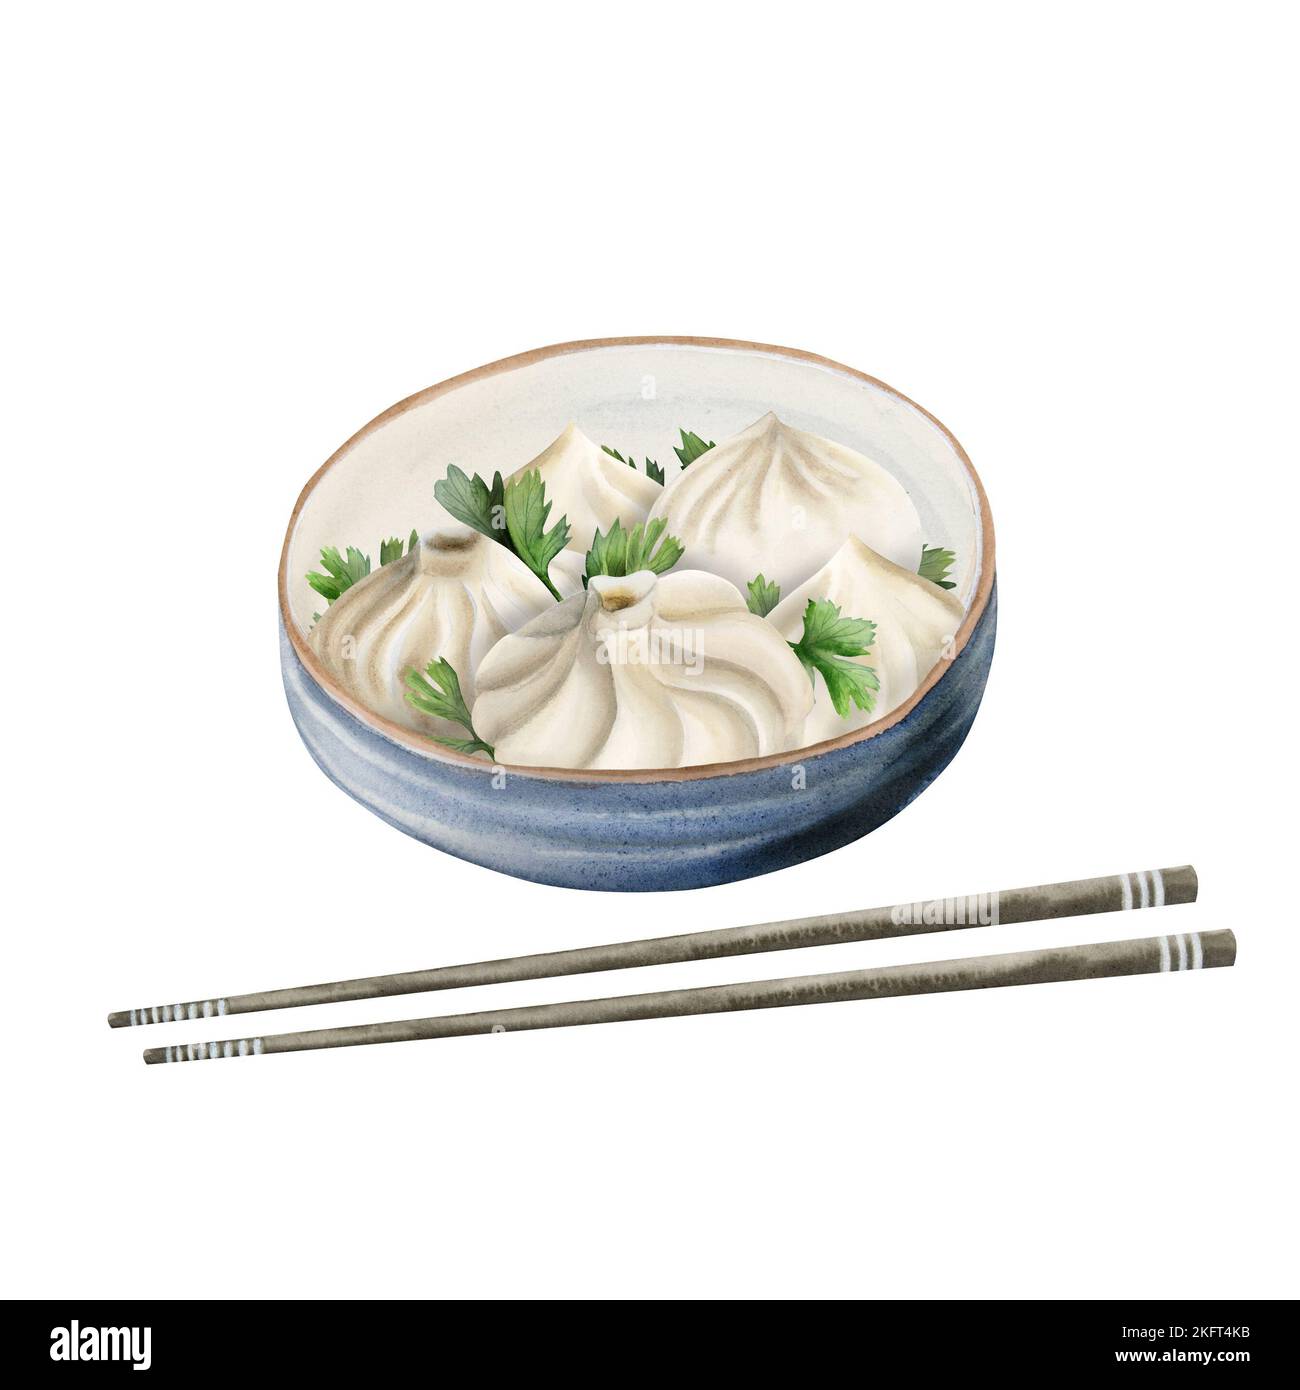 Watercolor ceramic bowl with traditional Chinese dumplings Dim sum with parsley and chopsticks. Hand drawn watercolor illustration isolated on white Stock Photo